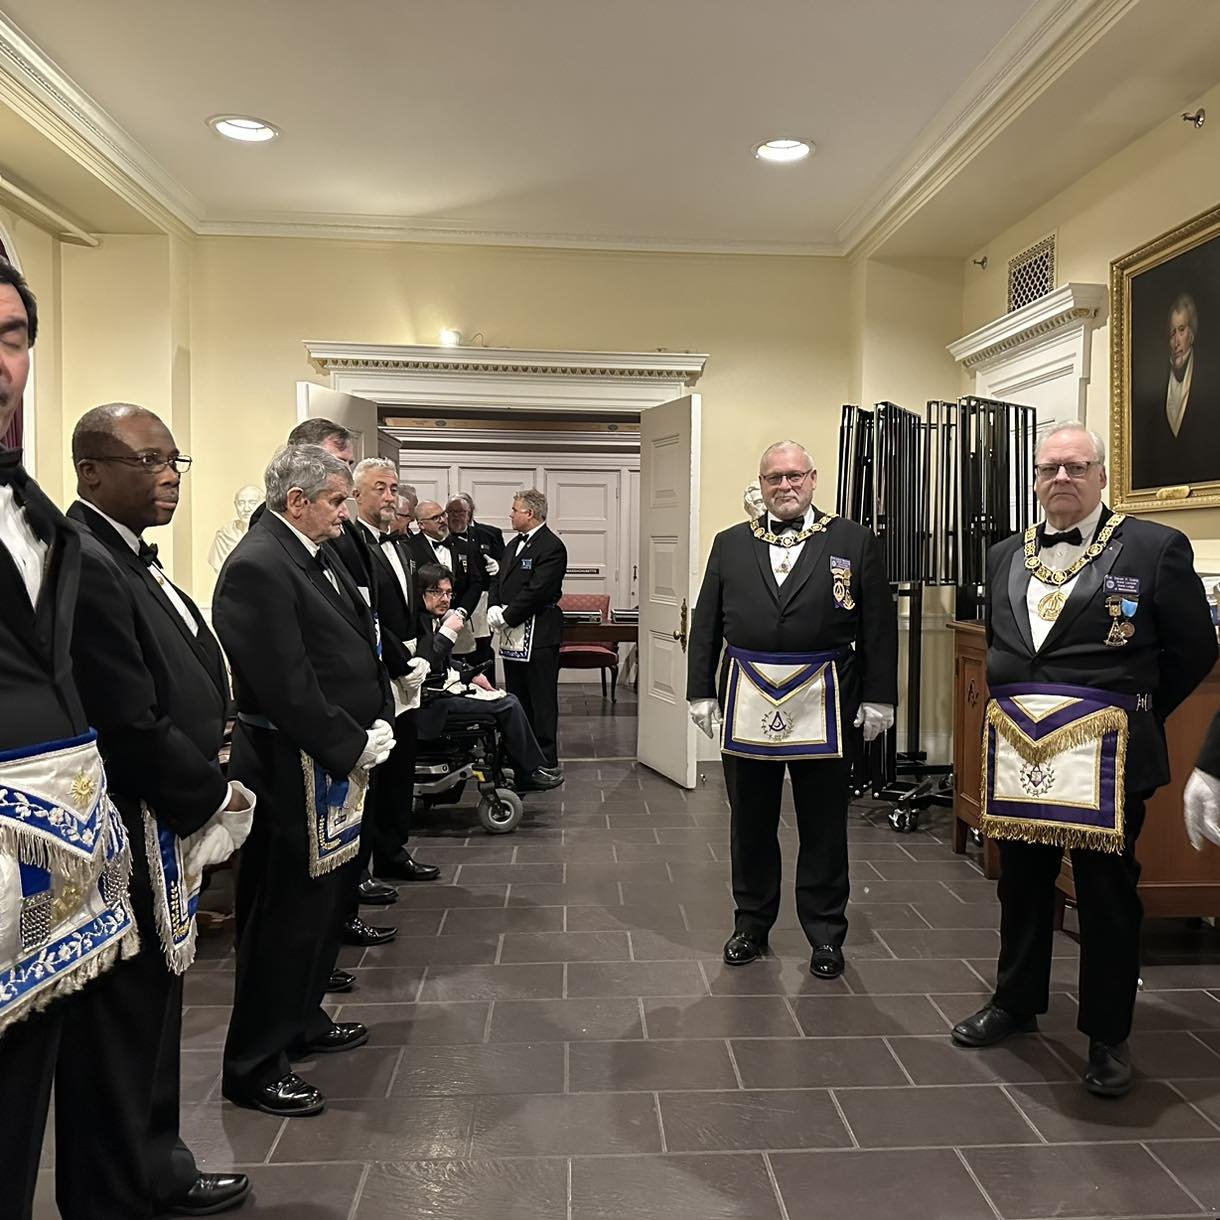  The Eighth Masonic District assembled 